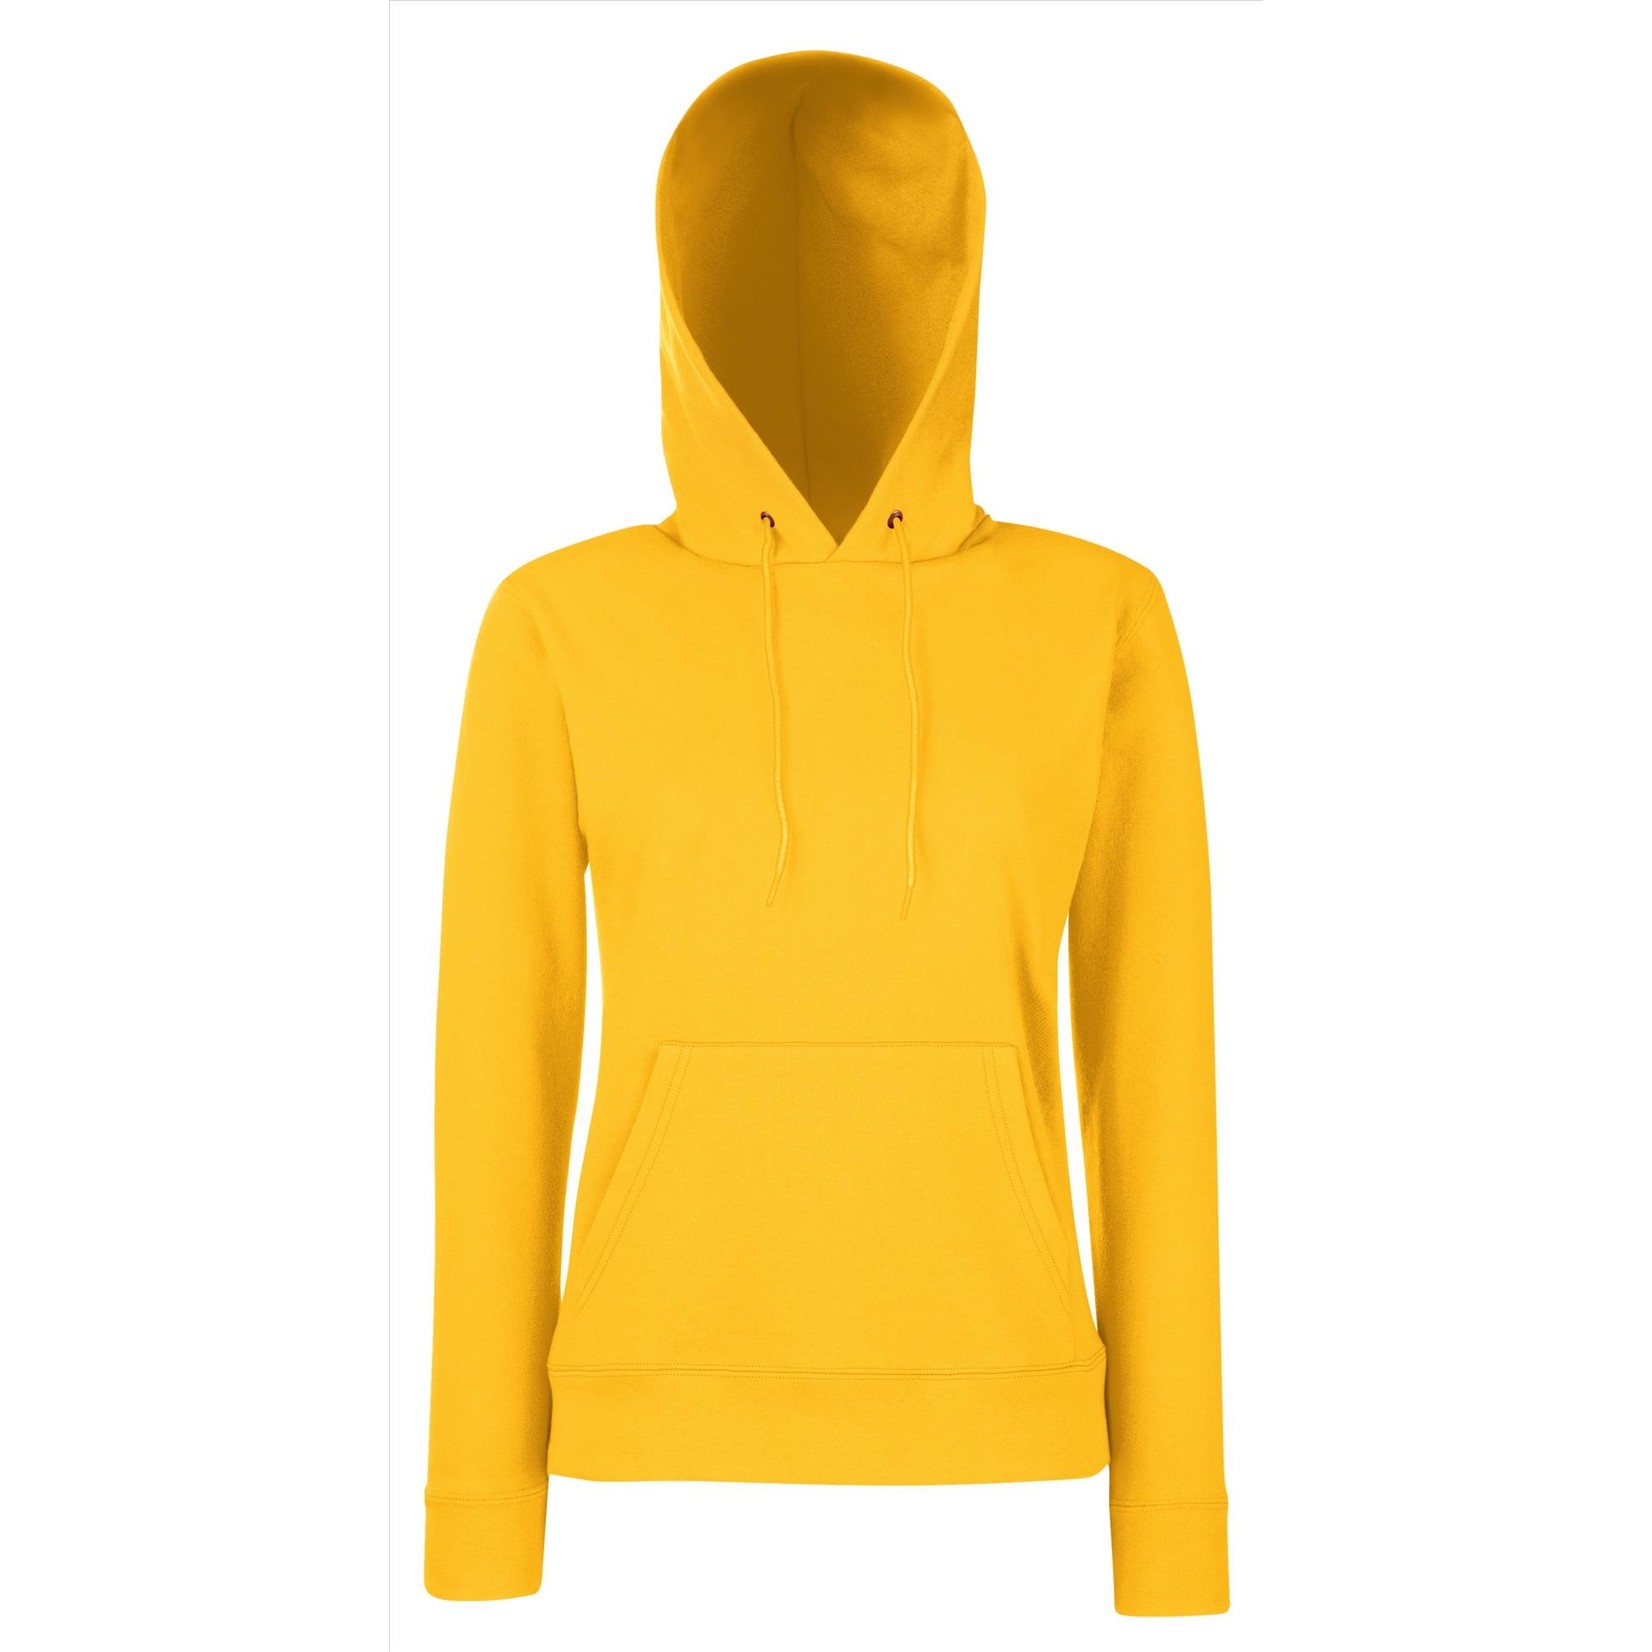 Fruit of the Loom Lady-Fit Classic Hoodie Sweater